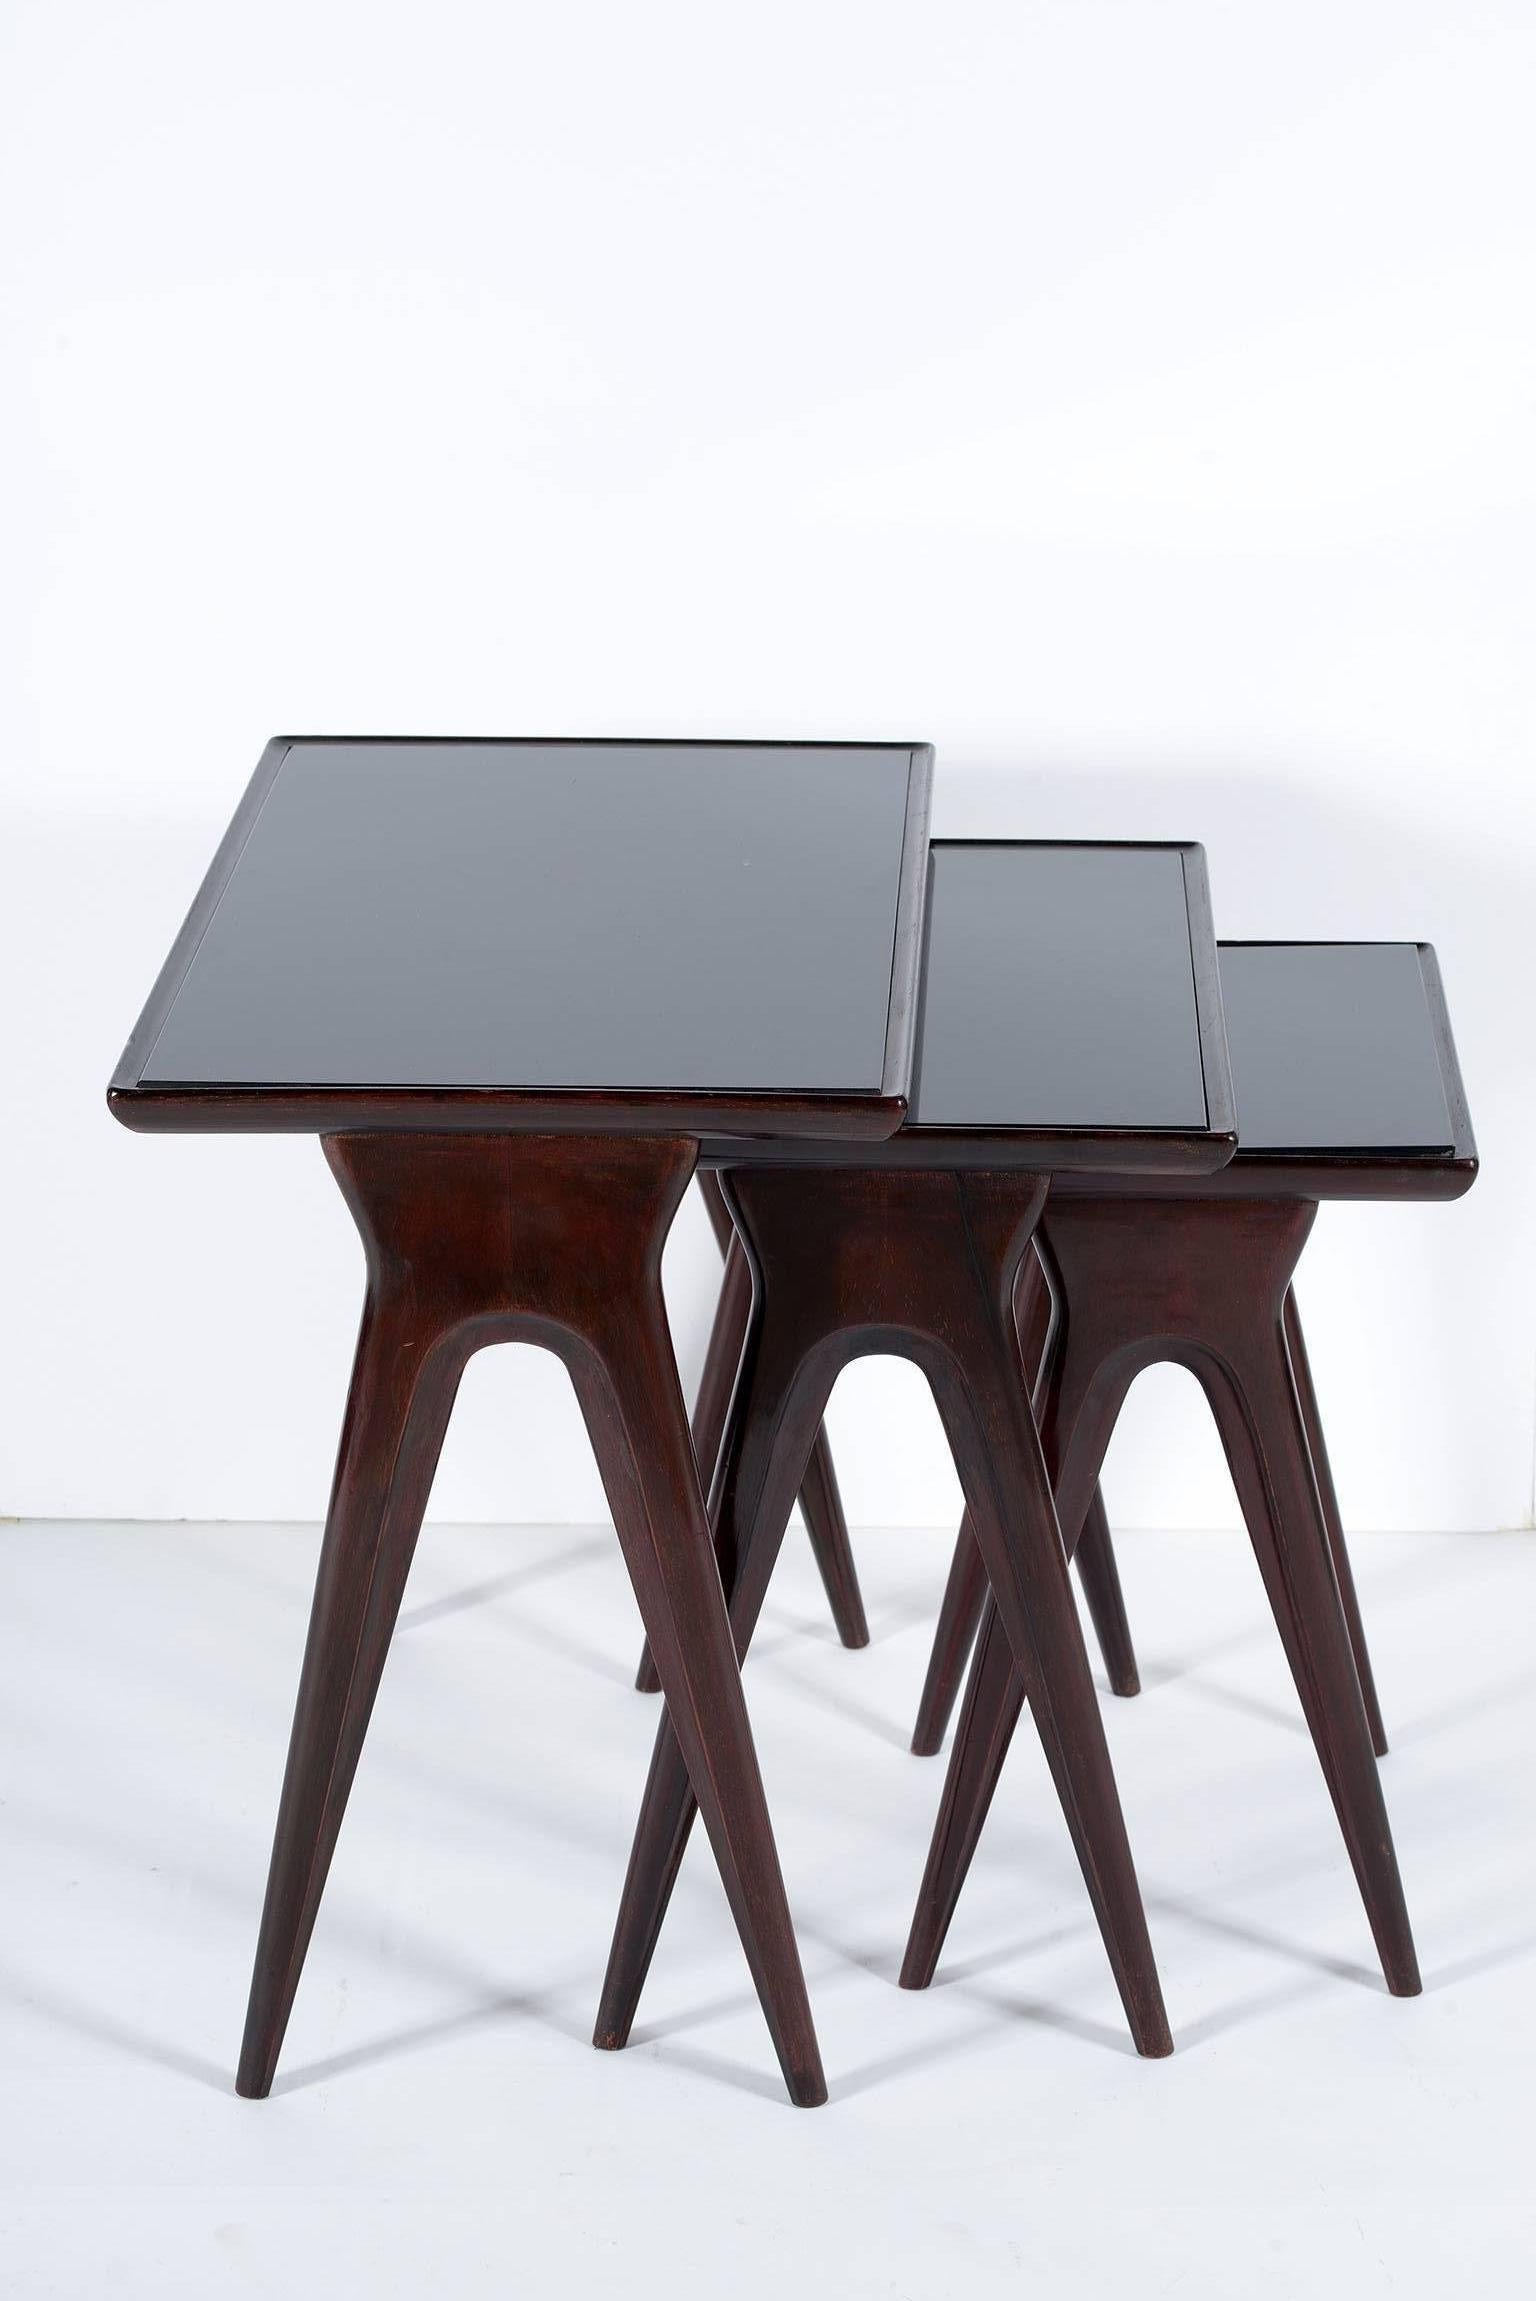 Three nesting tables with slender legs in dark wood and black glass top.
The listing measures are when the tables are stacking and closed.

 